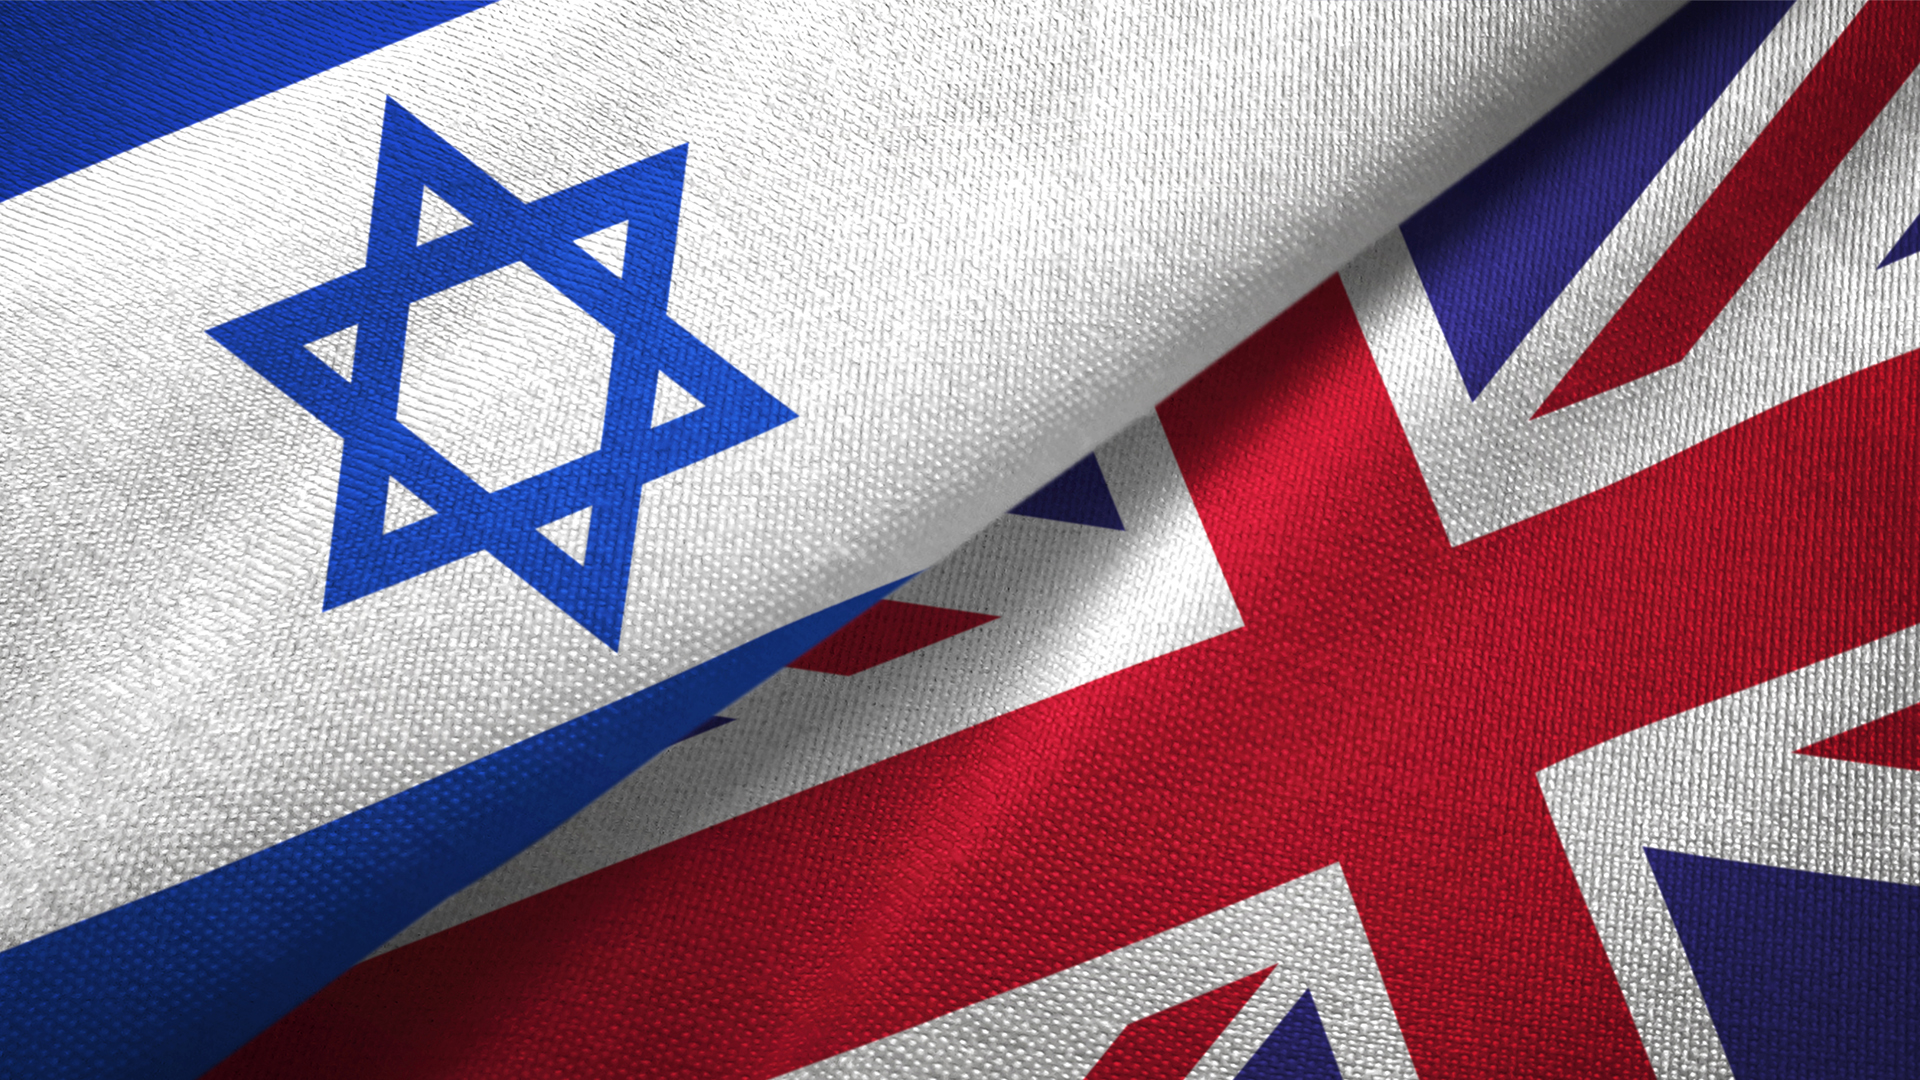 History made with first ever Israeli cannabis import into the UK